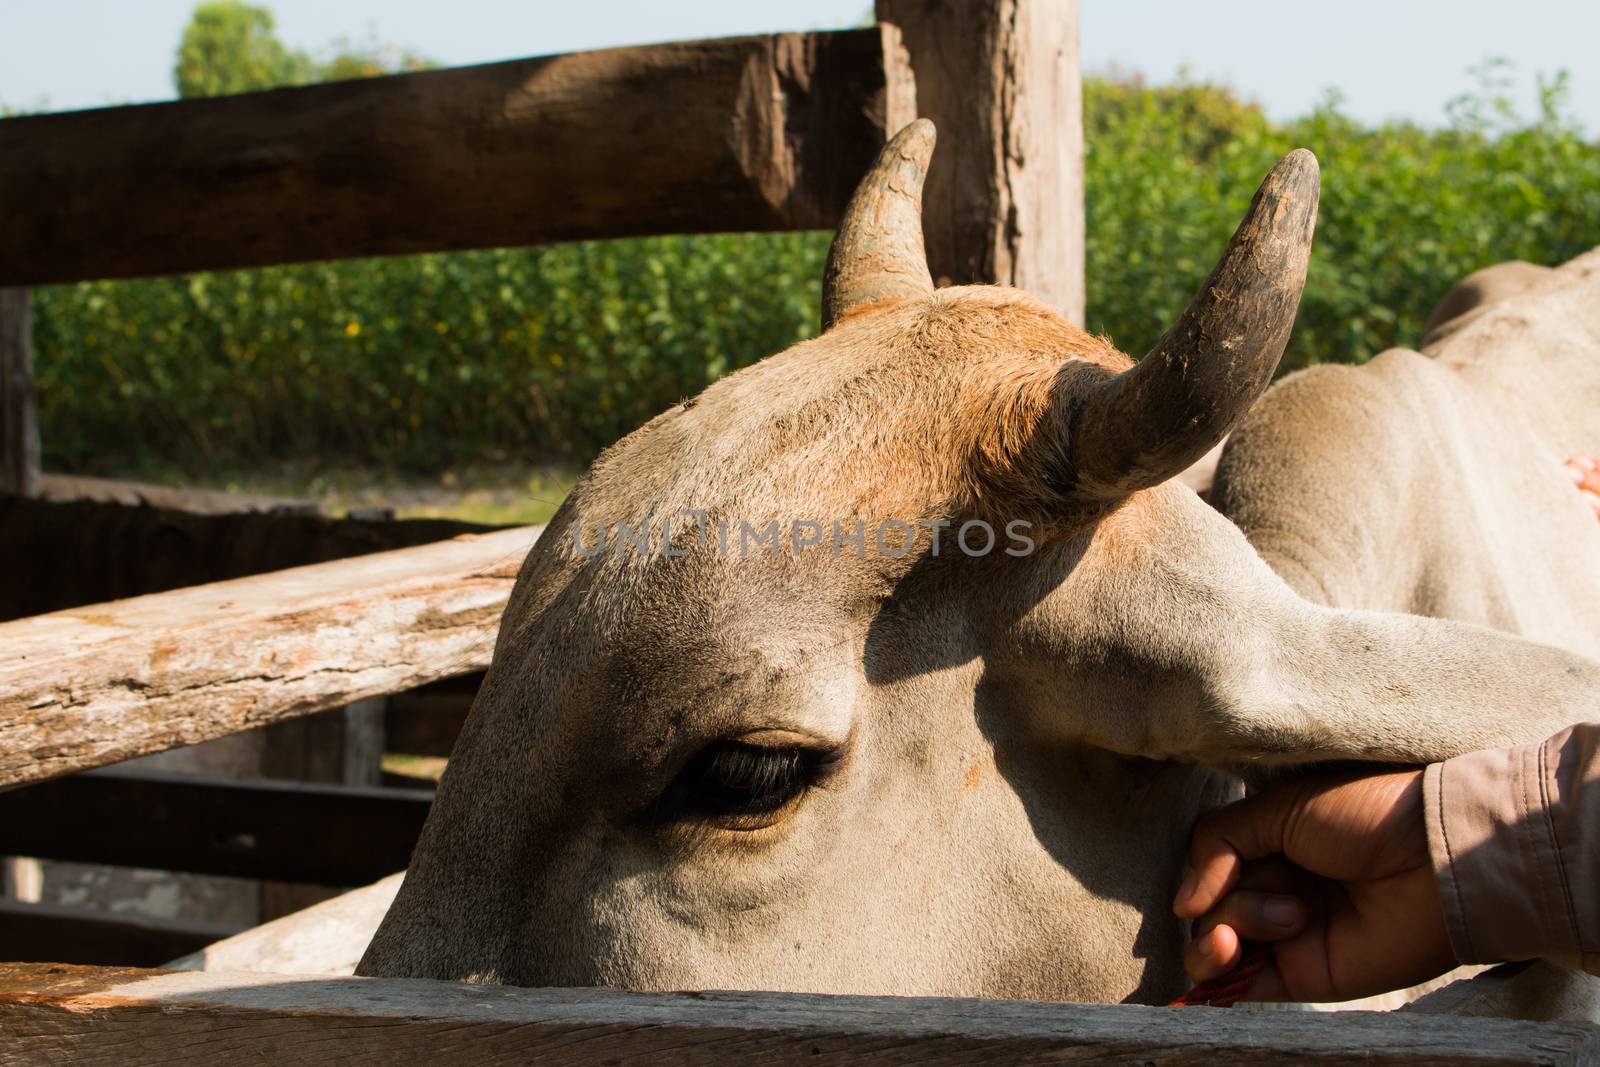 cows in thailand,Skinny, sick cows,close up eye